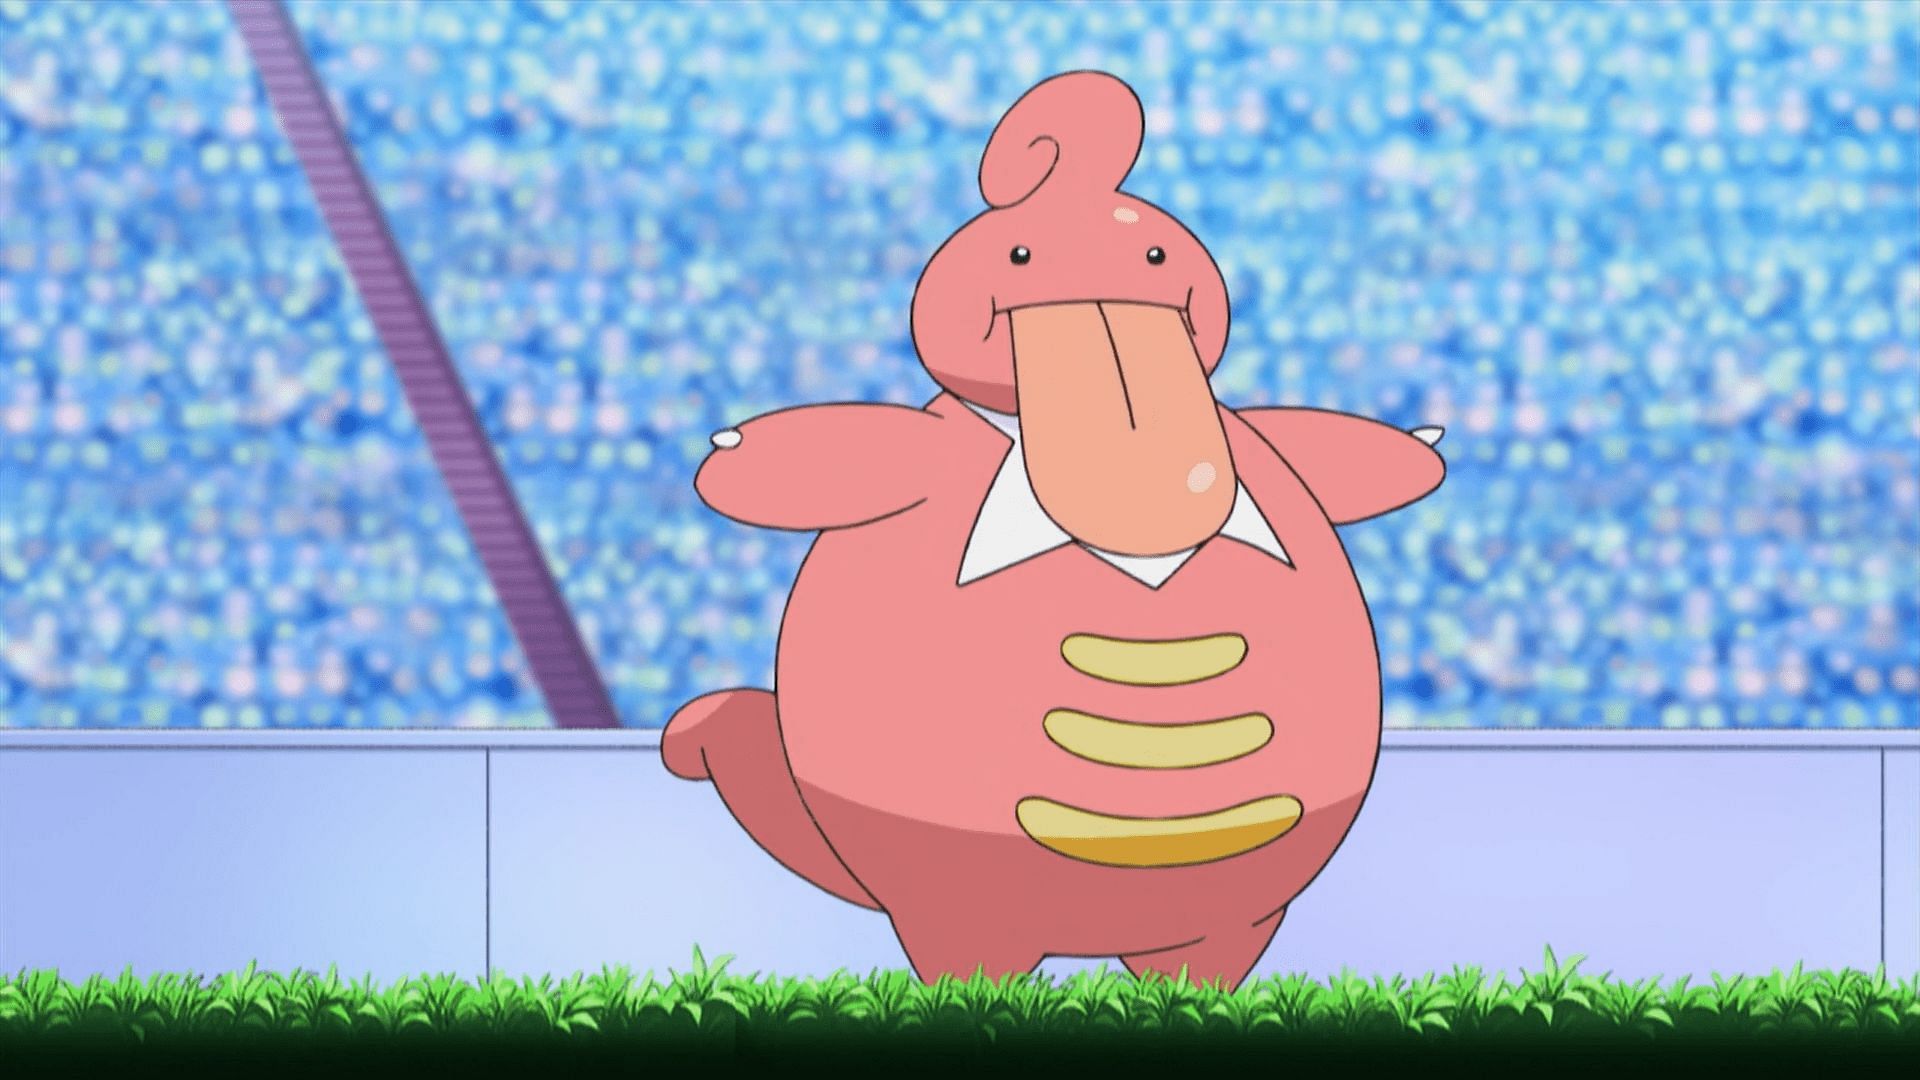 Lickilicky is a Sinnoh evolution that fell a bit flat in the eyes of many due to its off-putting design (Image via The Pokemon Company)